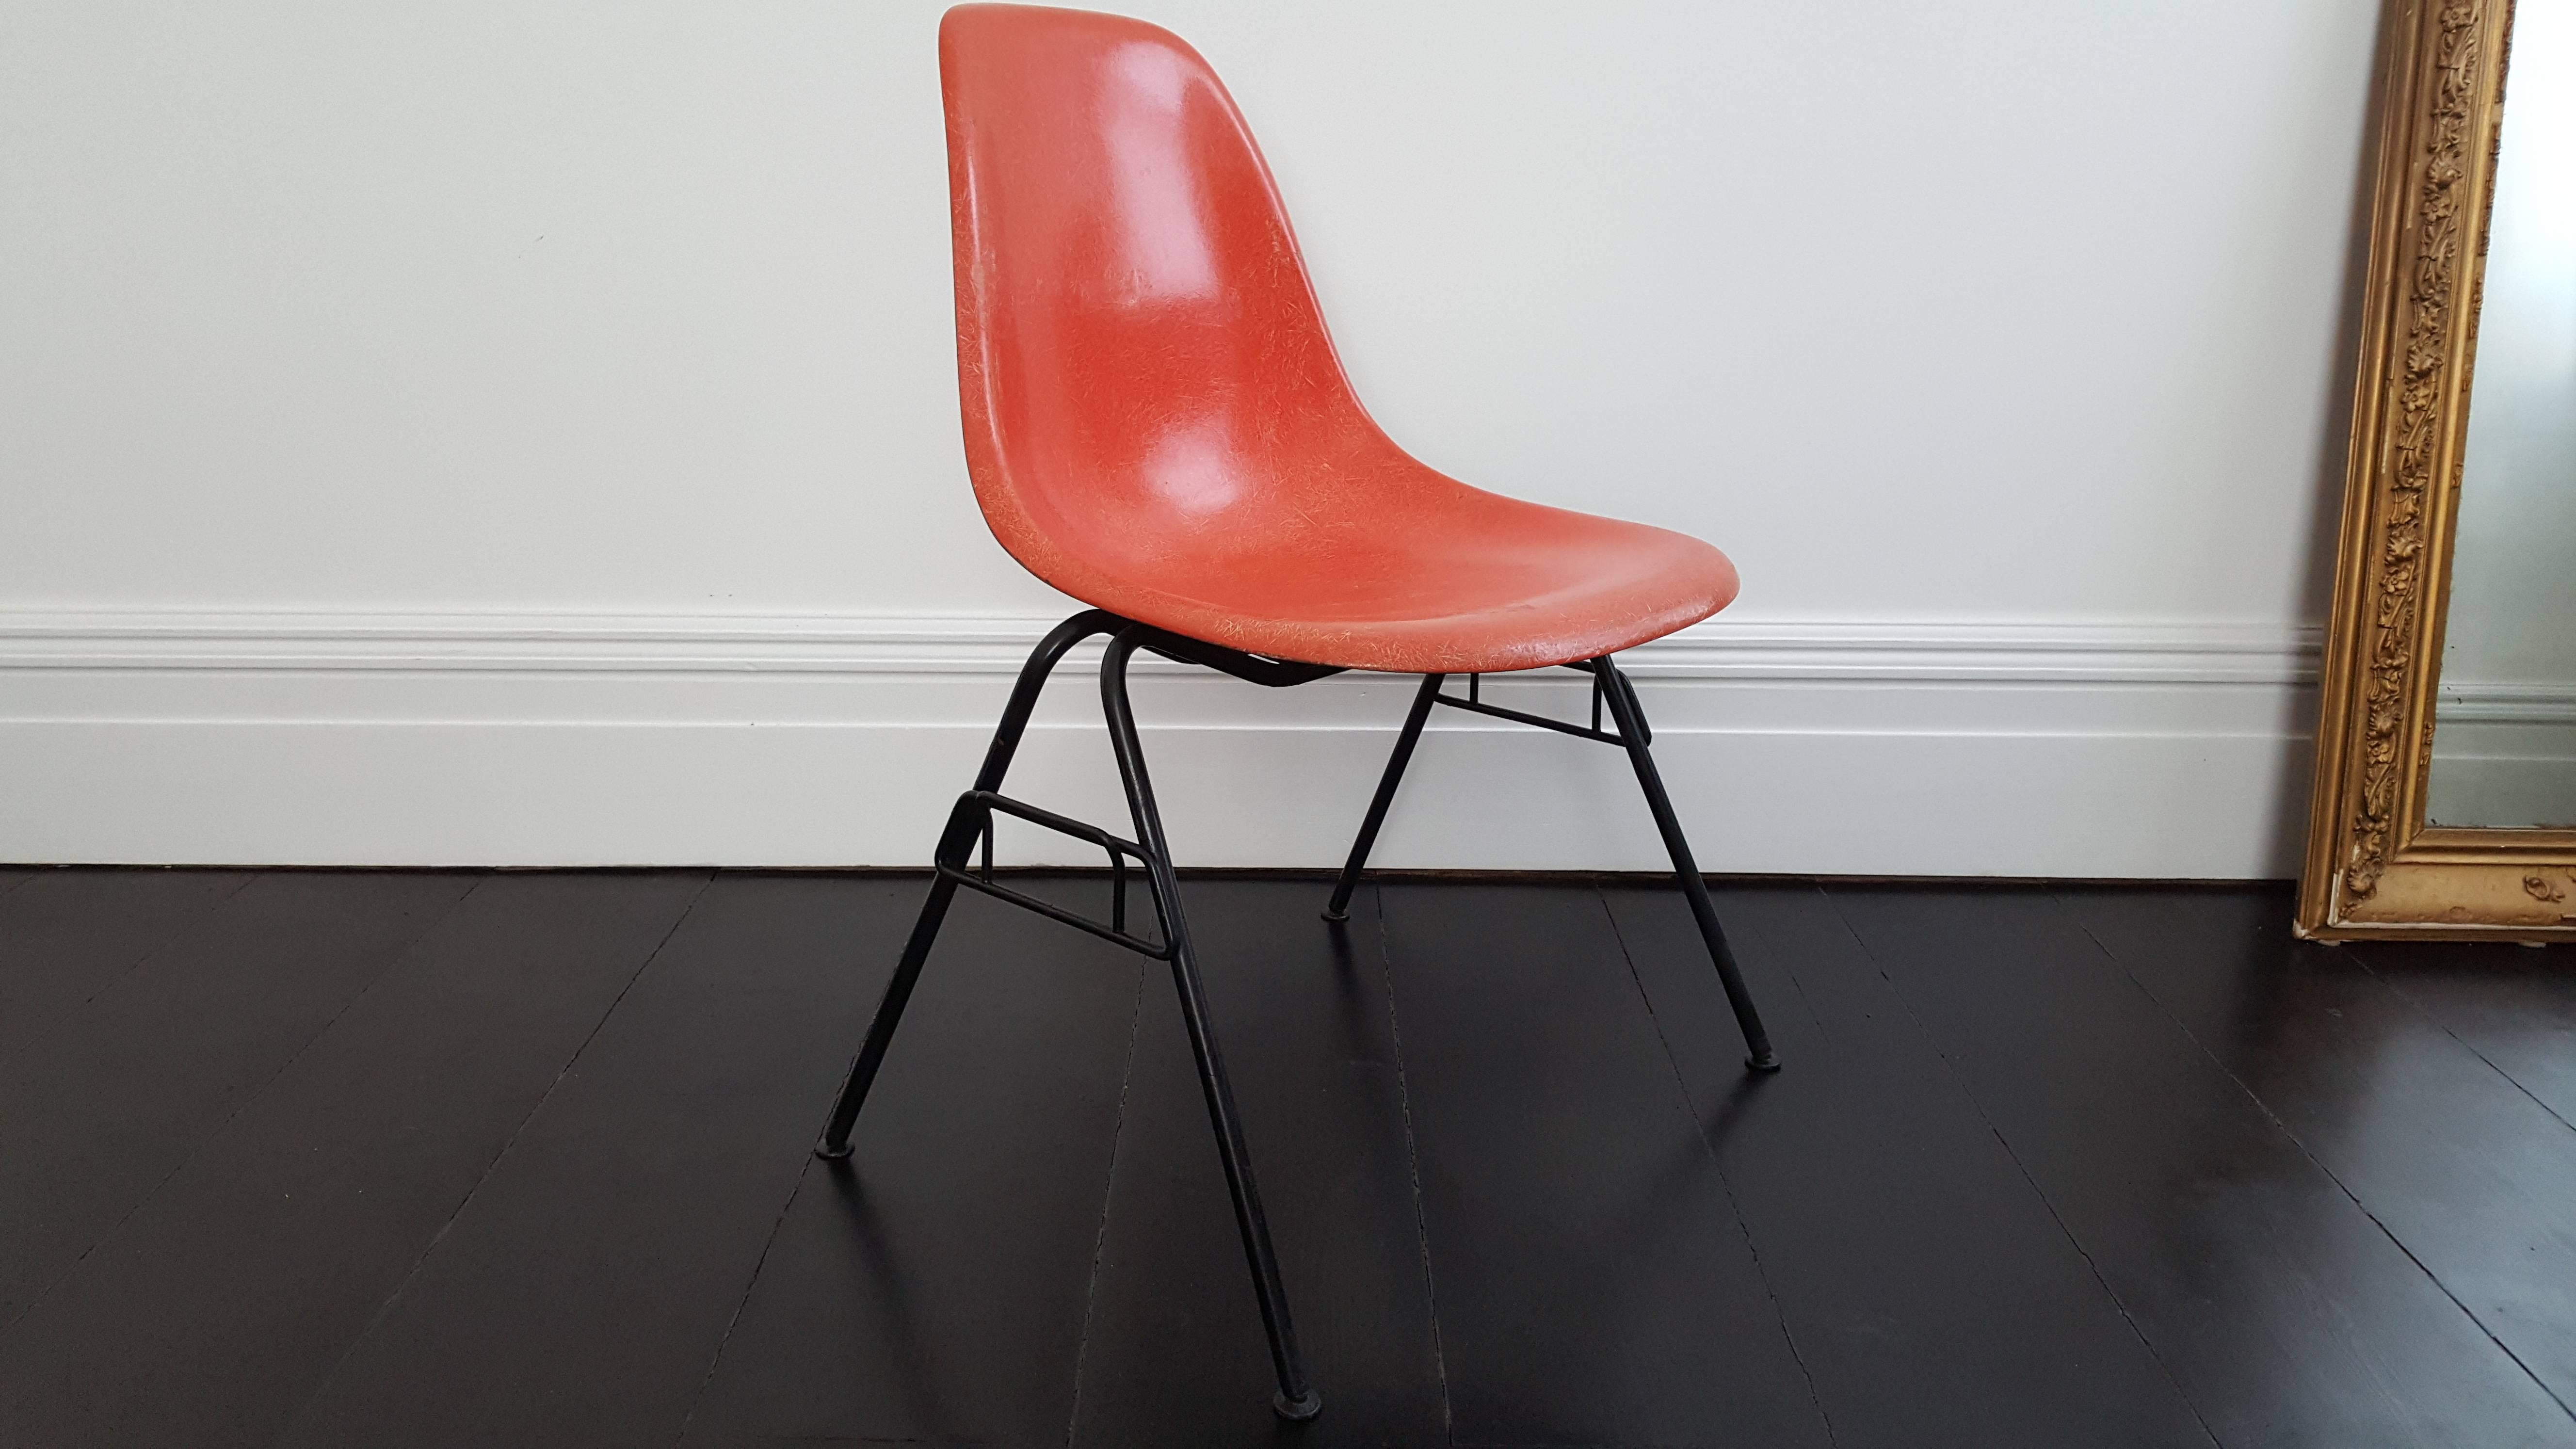 A vibrant deep orange red fibreglass Charles and Ray Eames designed Herman Miller DSS stacking chair with black base.